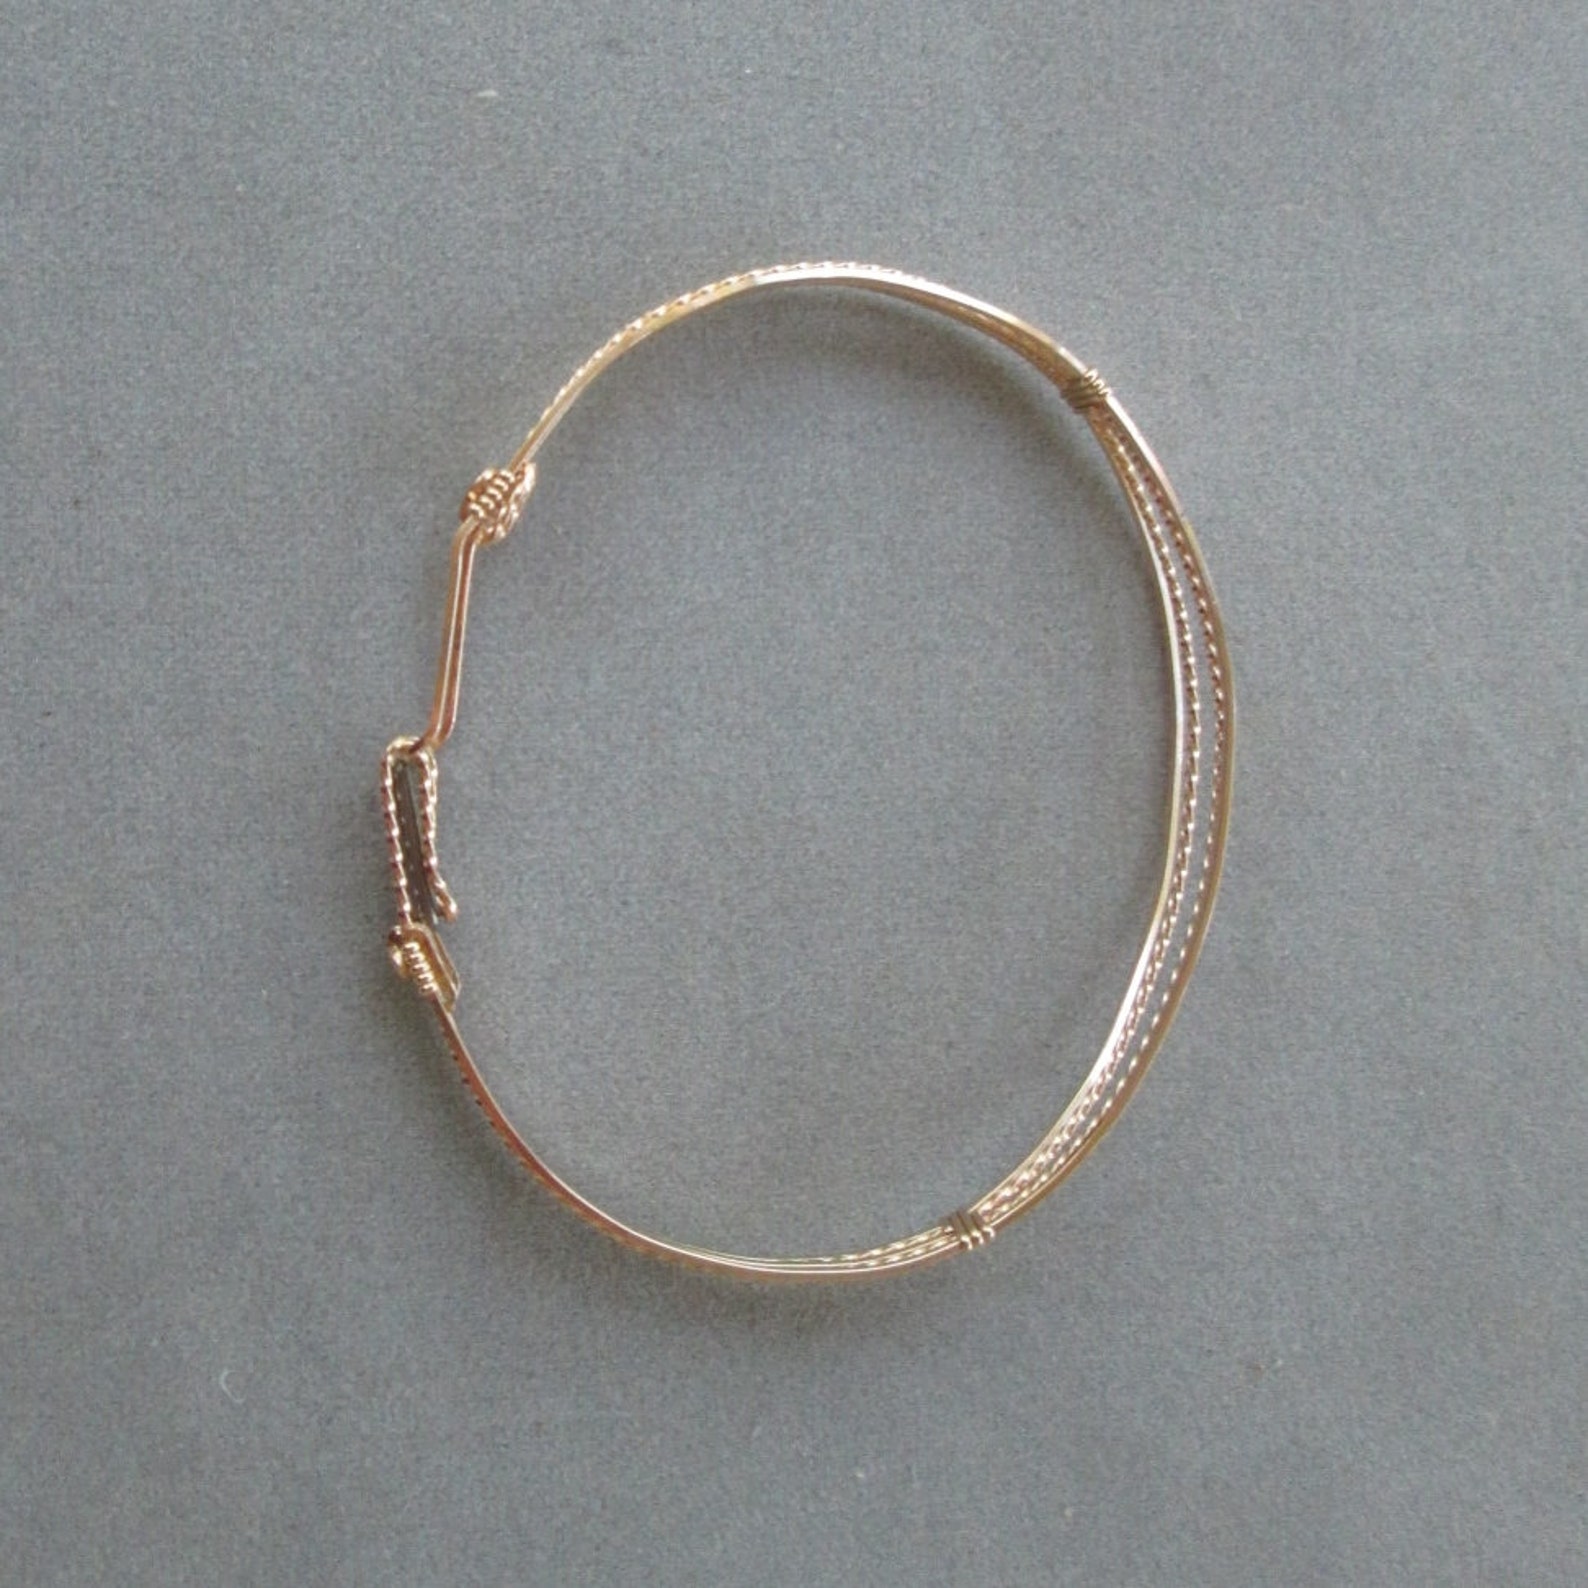 5 Strand Wire-wrapped Bracelet in 14K Gold-filled Wire - Etsy